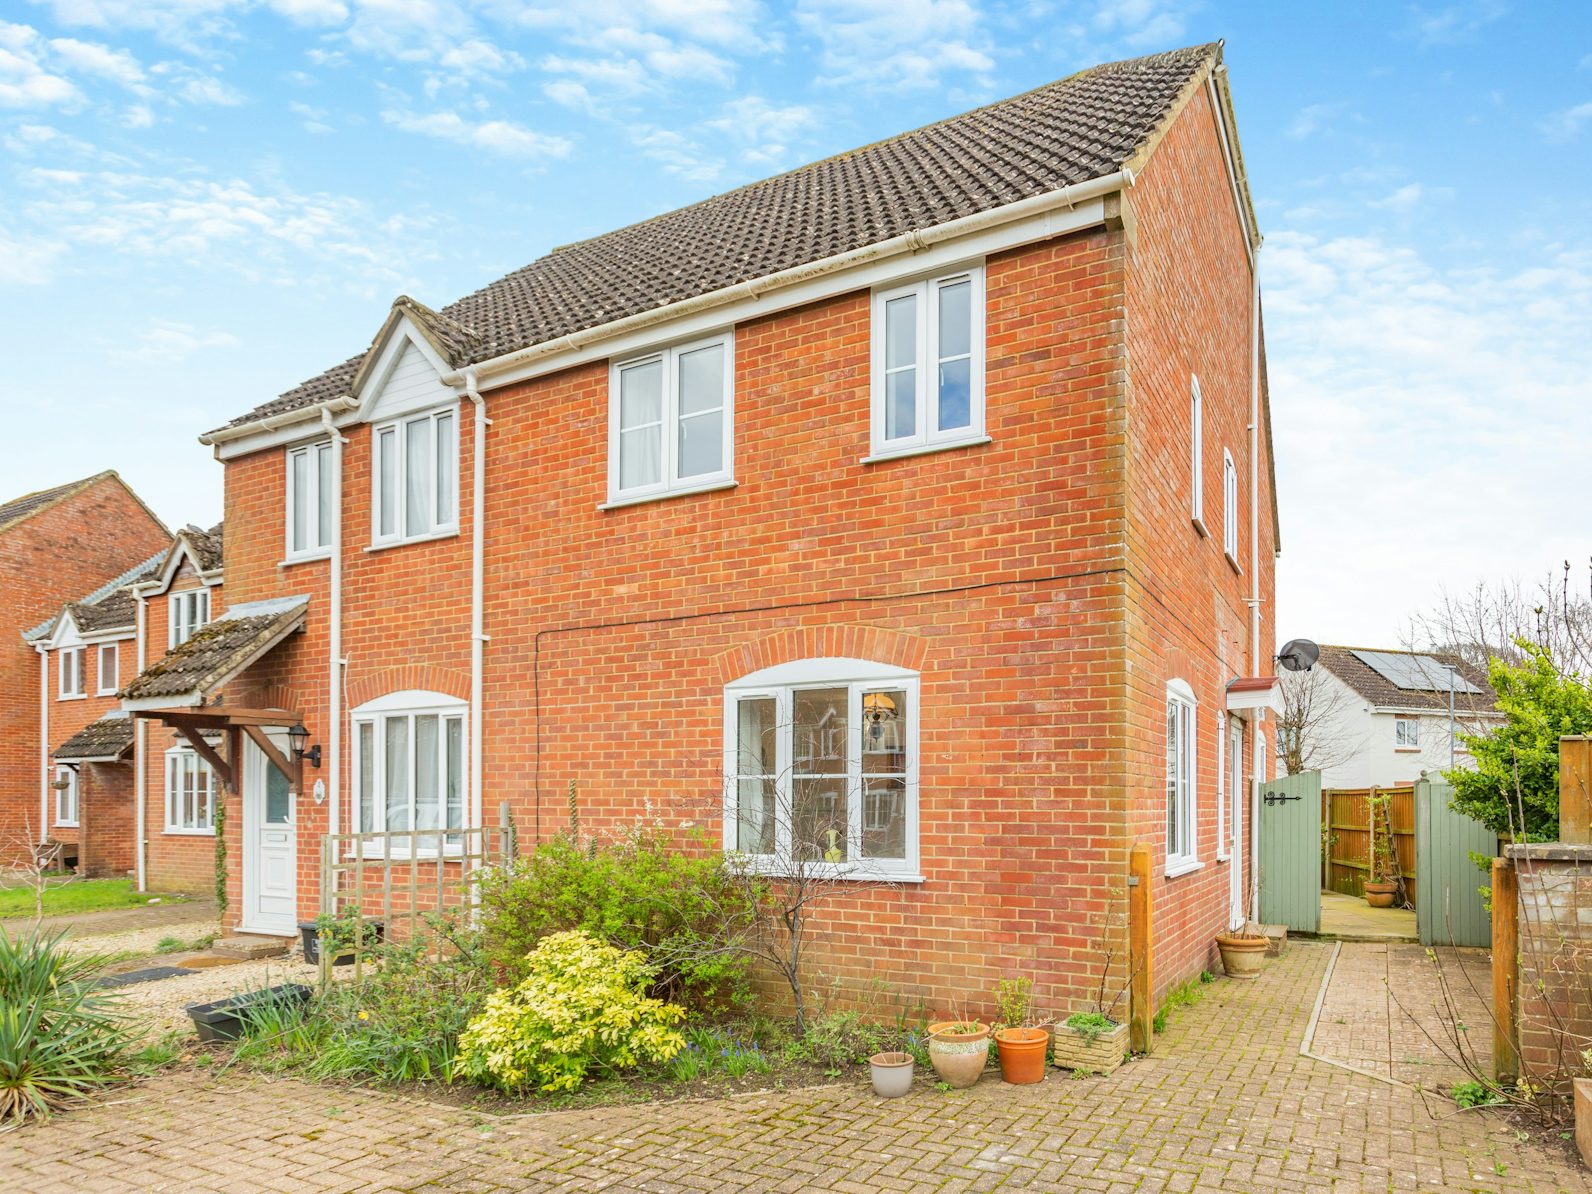 End of Terrace for sale on Sands Close Rowde, Devizes, SN10